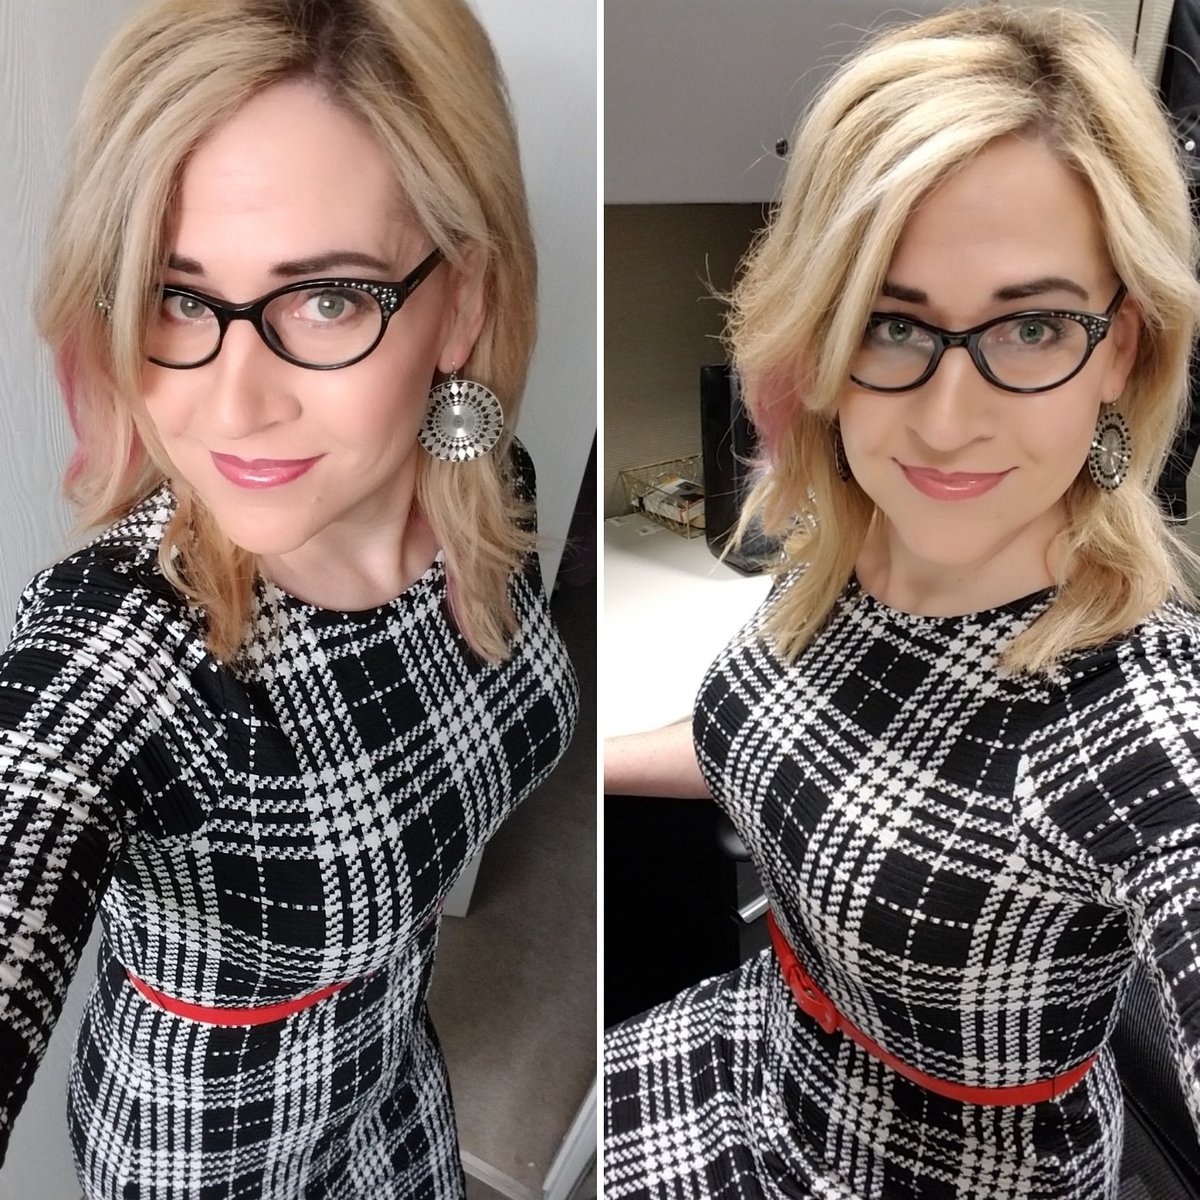 'Yes, I can code that for you.'  (You best check my rates first though..) #girlswhocode #girlslikeus #girlswithglasses #womenintech #nofilter #twitchaffiliate #twitchgirls #pinkpeekaboohighlights #applicationarchitecture